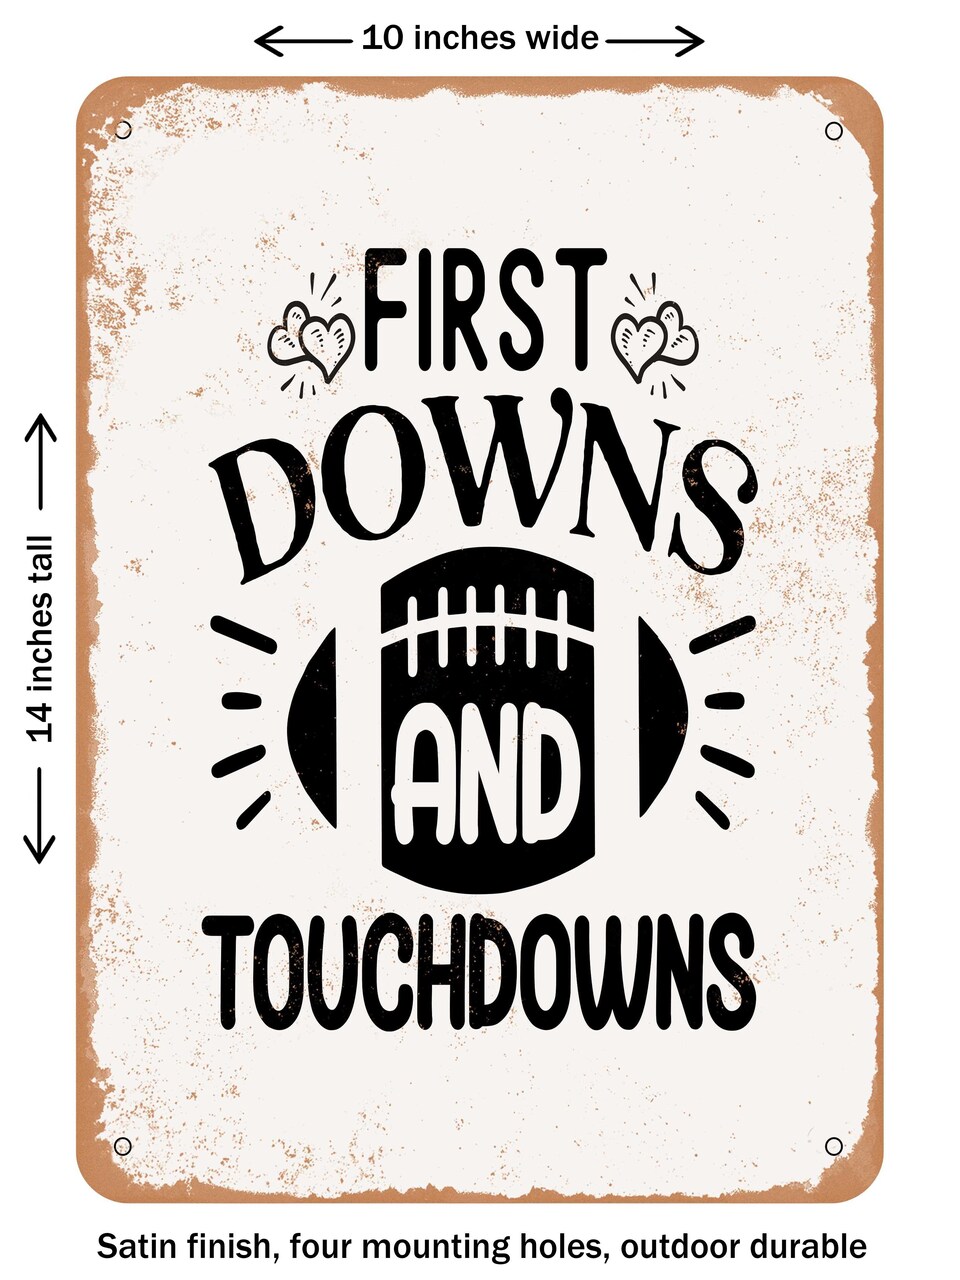 DECORATIVE METAL SIGN - First Downs and touchdowns  - Vintage Rusty Look